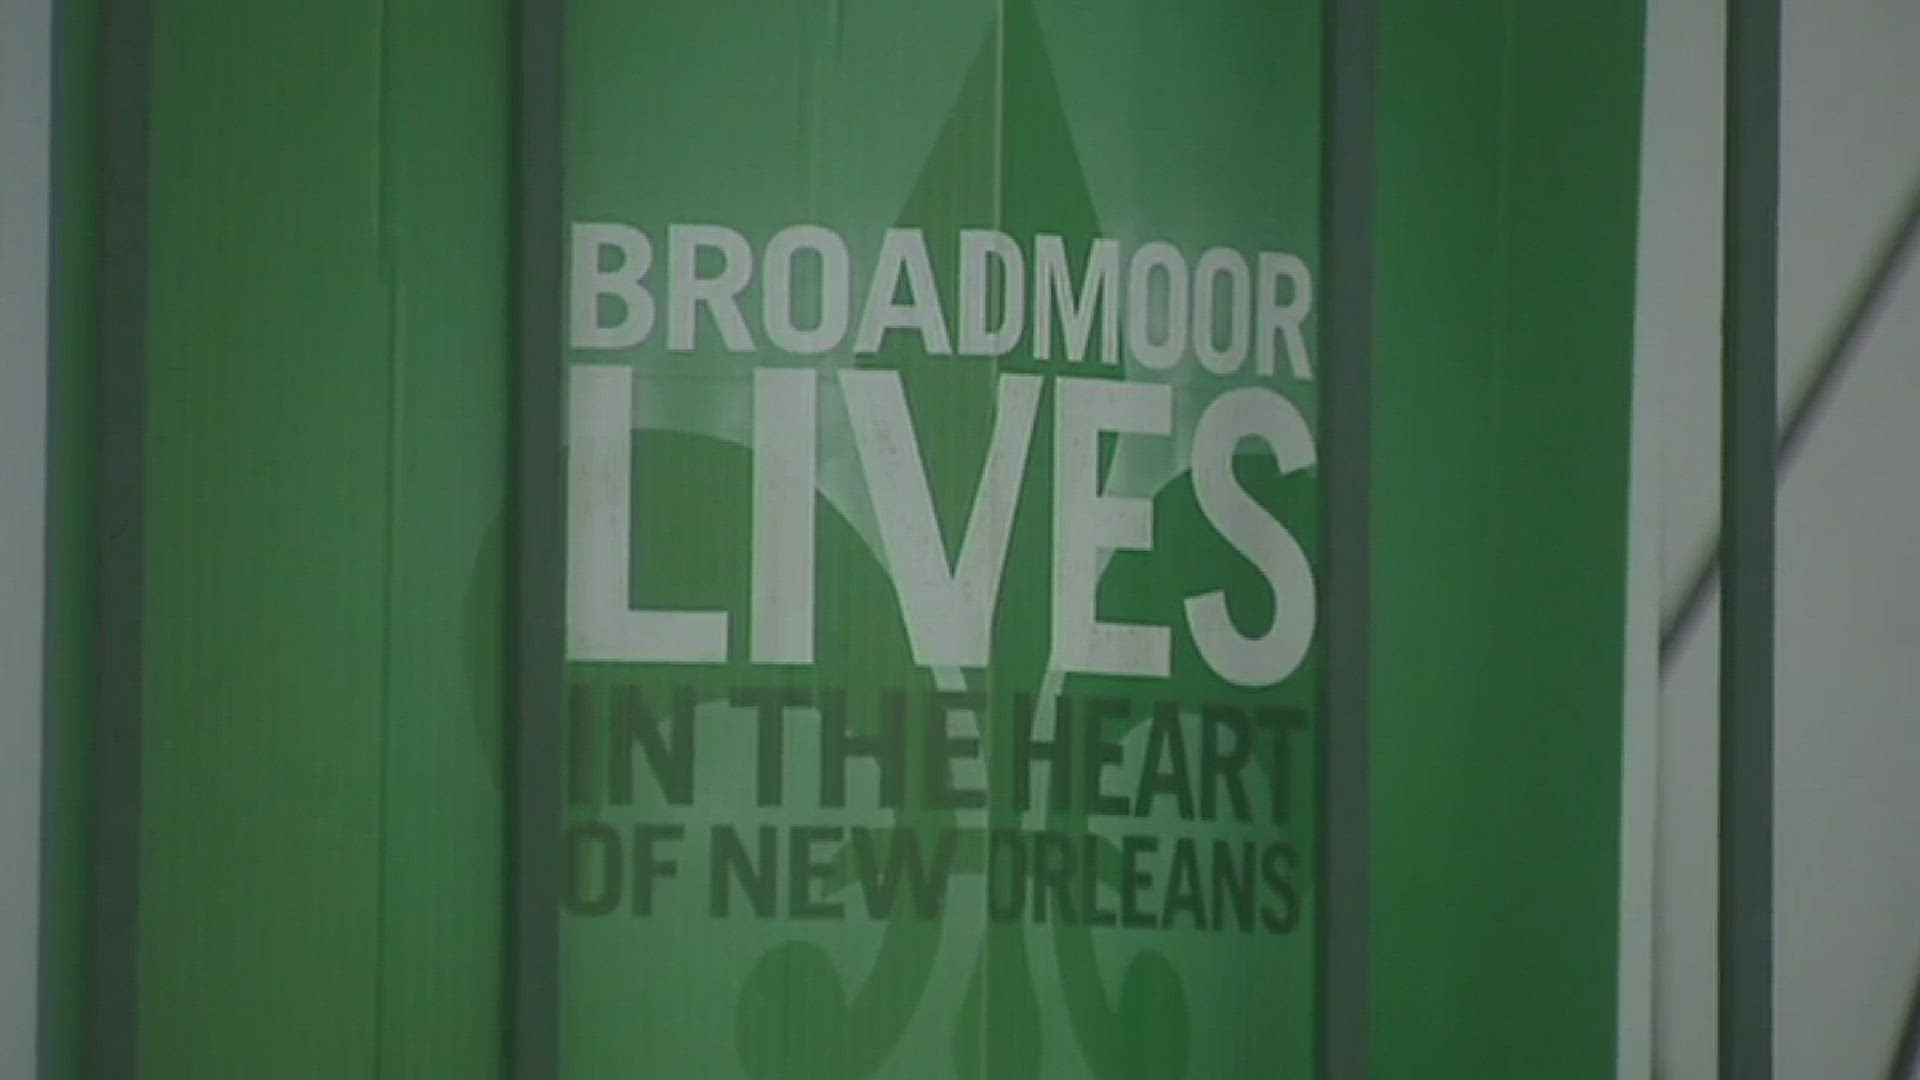 Broadmoor, a true mixture of New Orleans culture, has battled its way back from Katrina.